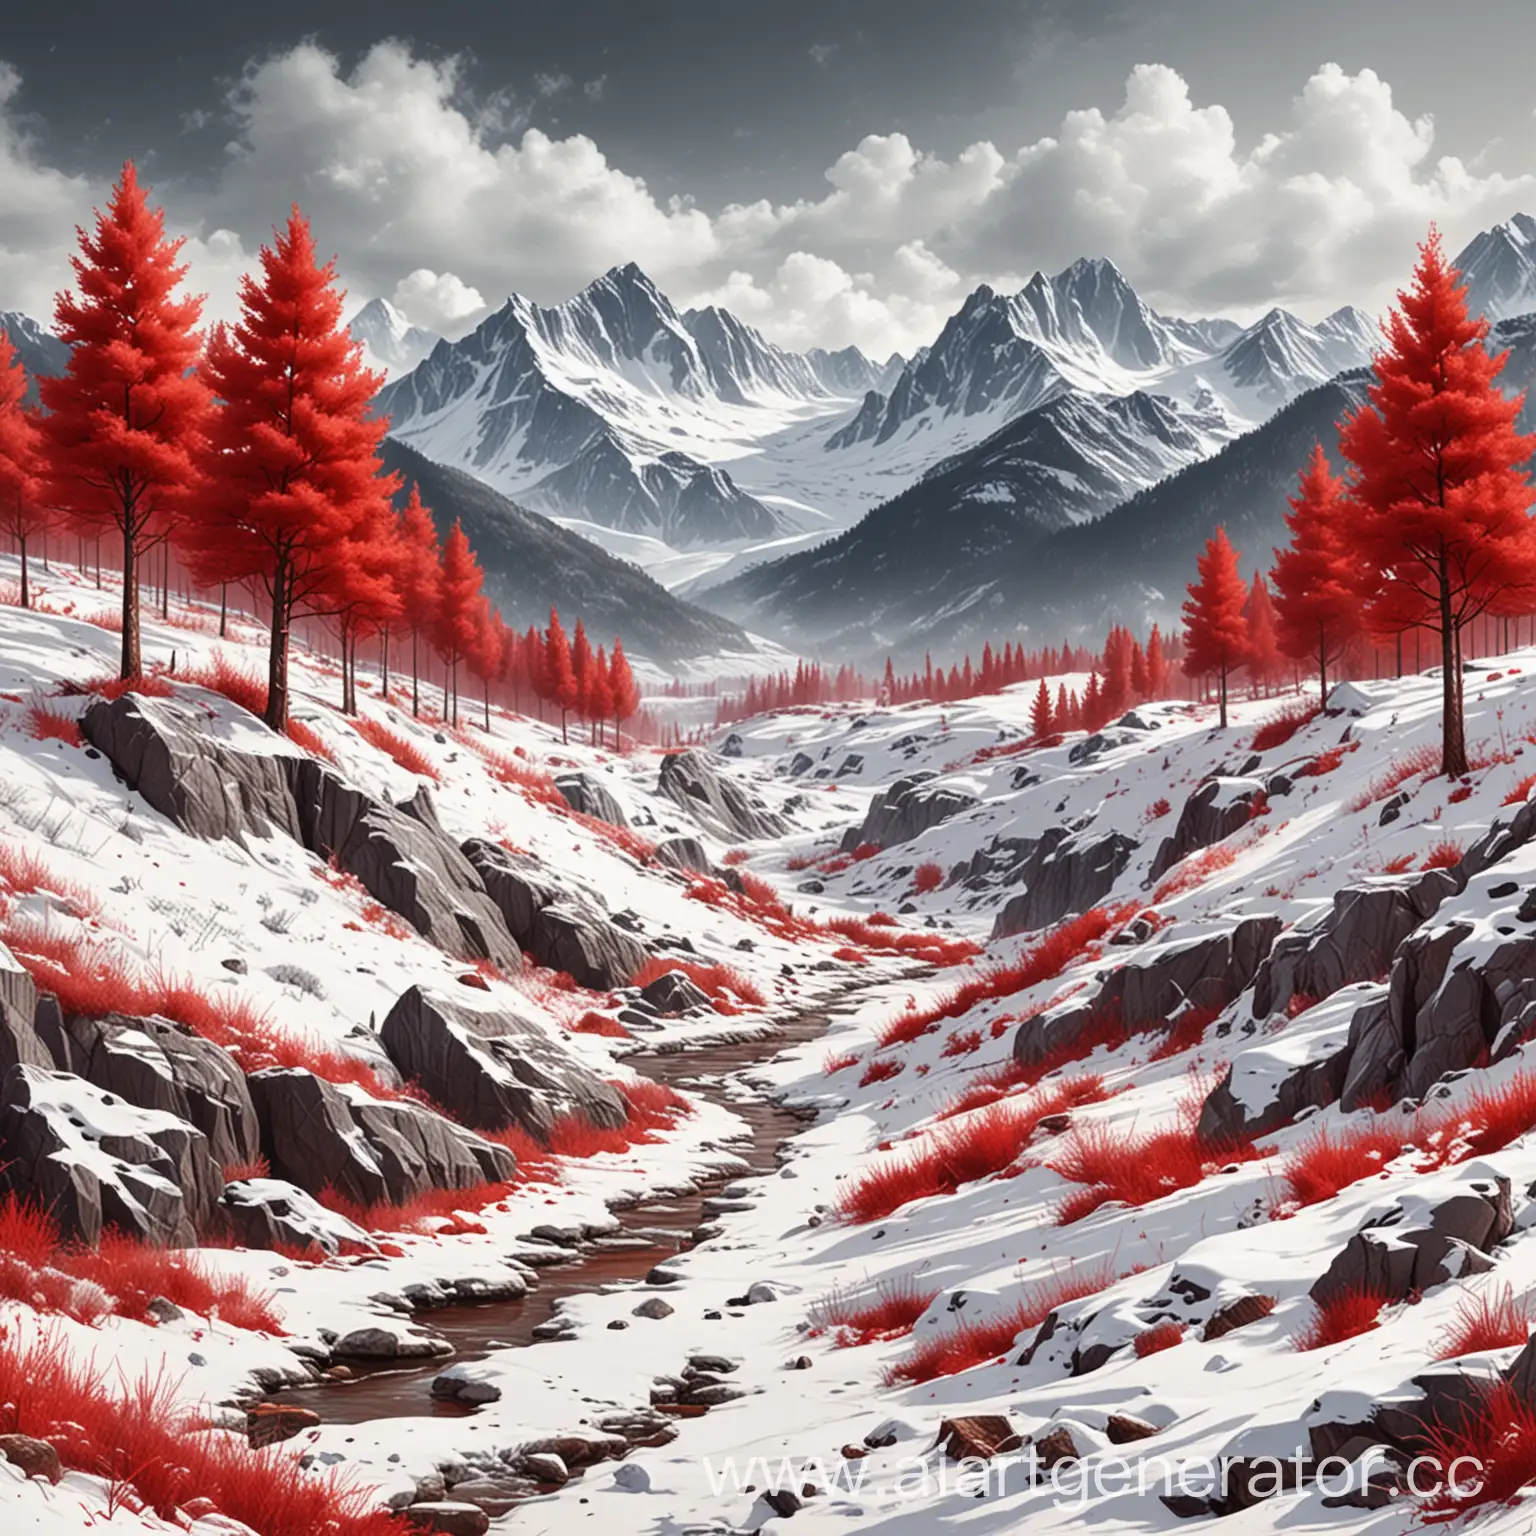 Majestic-Mountain-Landscape-with-Red-Trees-and-Snow-Concept-Sketch